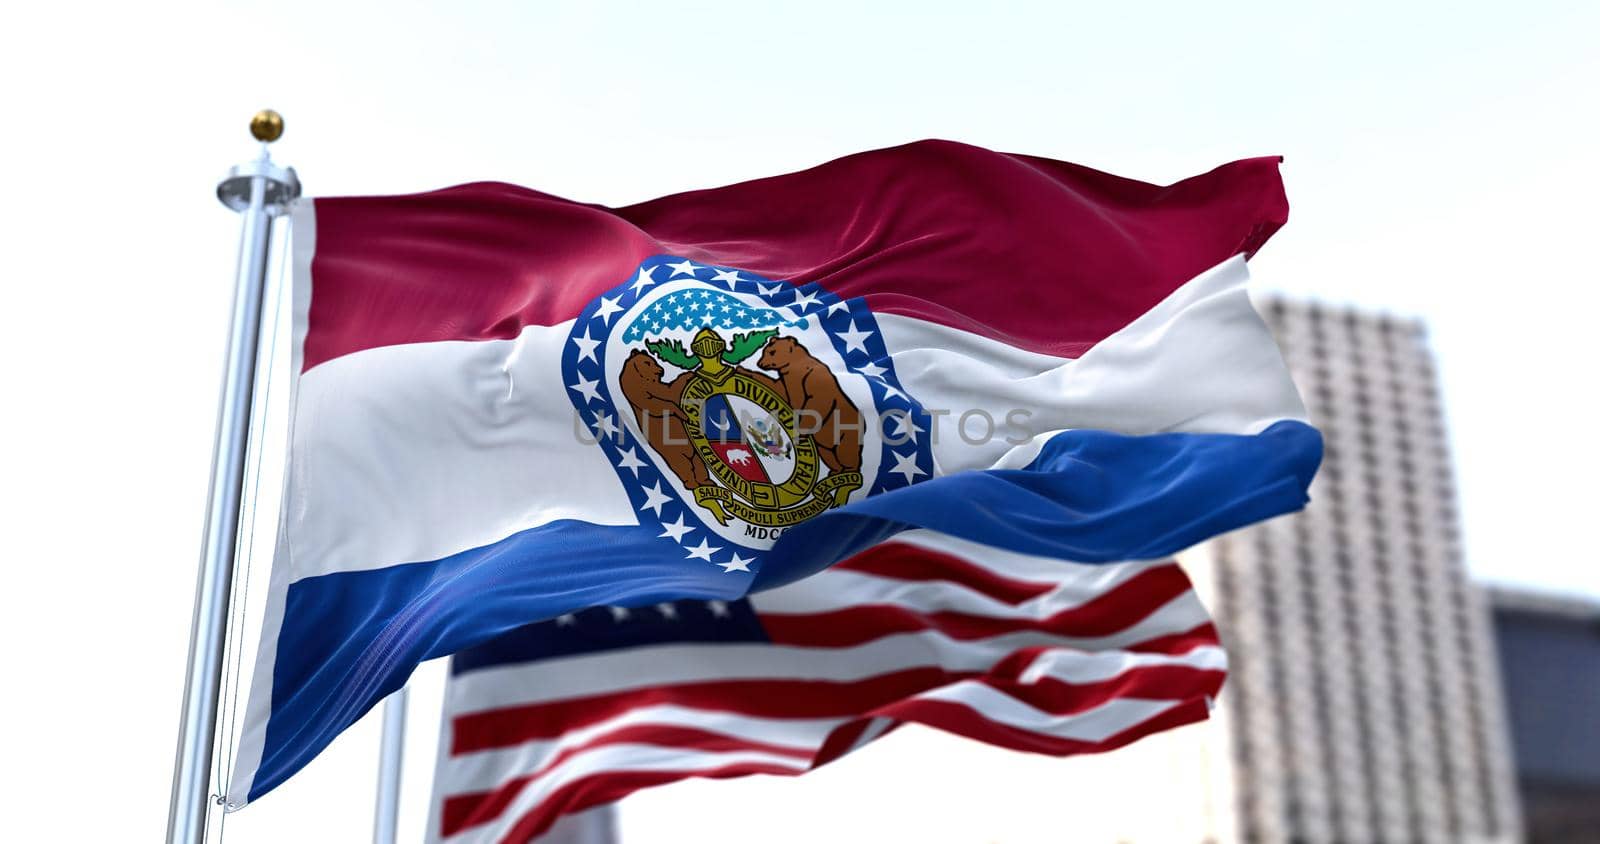 the flag of the US state of Missouri waving in the wind with the American flag blurred in the background. Missouri was admitted to the Union on August 10, 1821 as 24th state